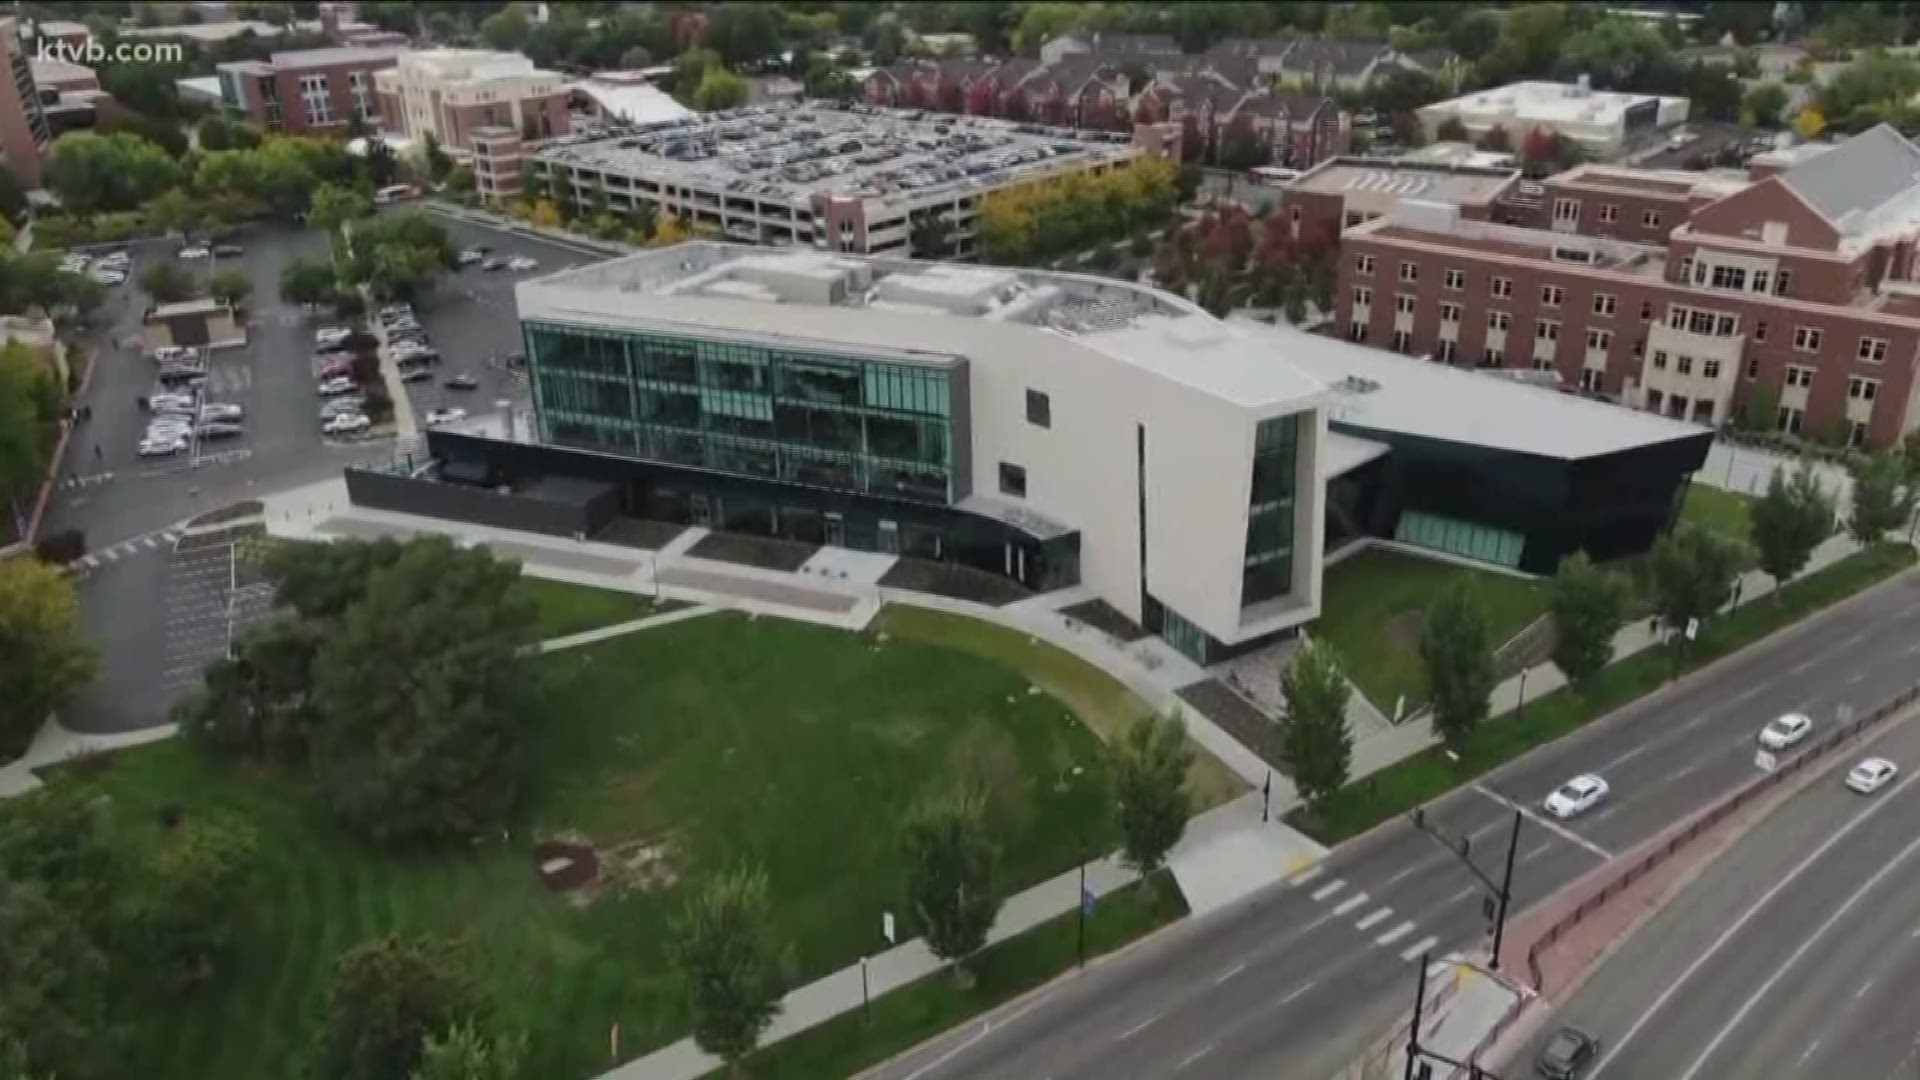 Go inside the newest building on Boise State campus and see what makes it so special.